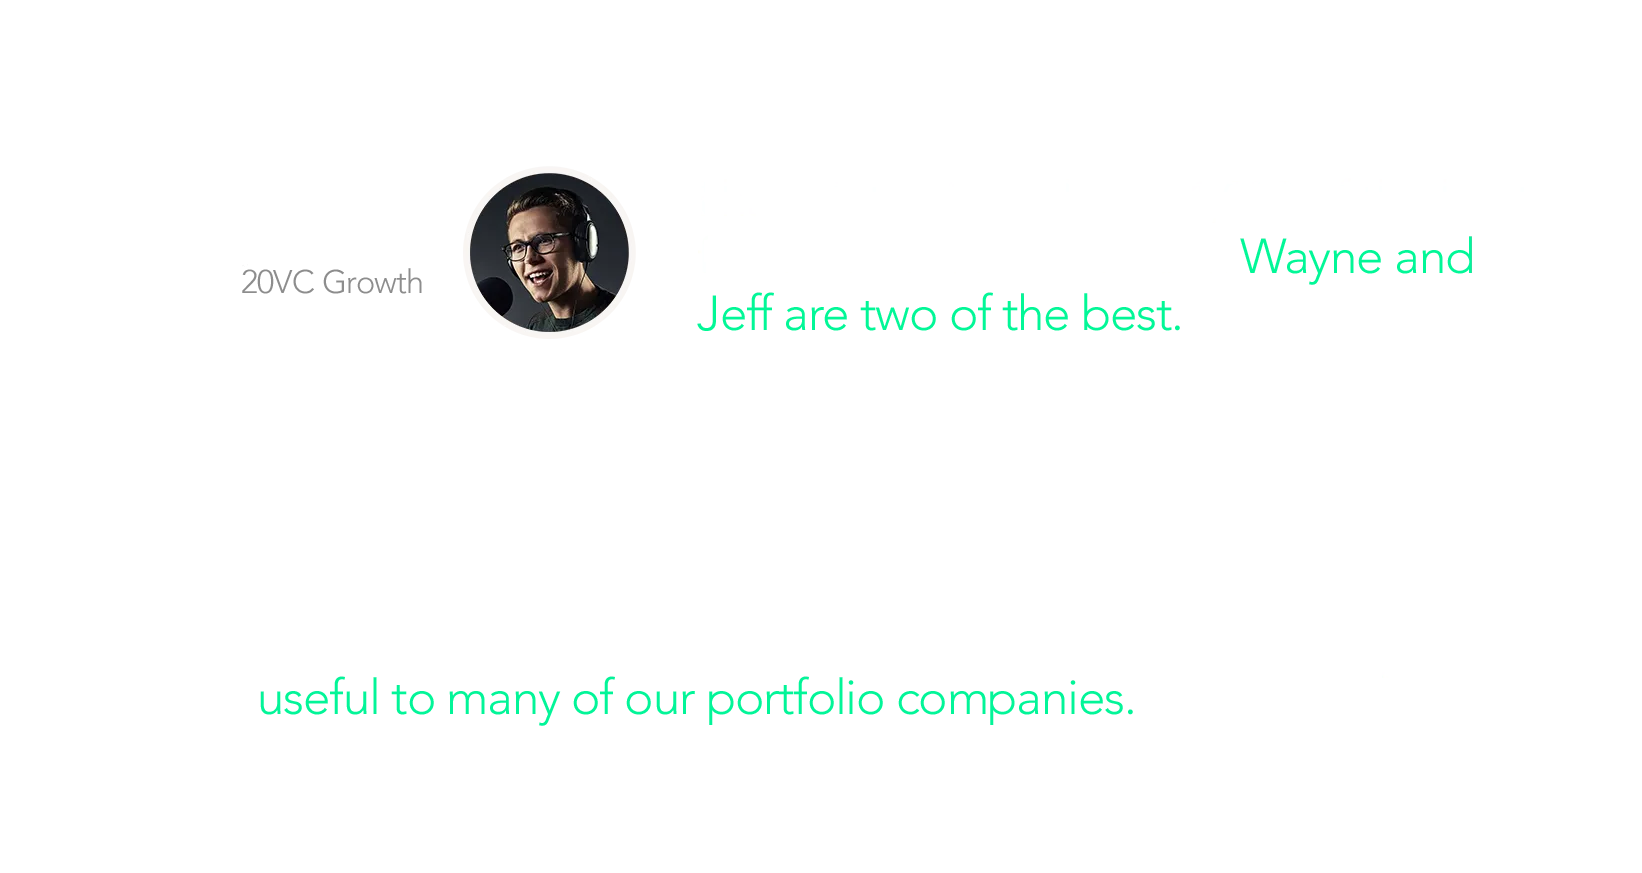 'I have interviewed over 1,000 of the best founders in the world and Wayne and Jeff are two of the best' - Harry Stebbings, 20VC Growth. 'We believe that Digits has the potential to change how small businesses digest financial information and be useful to many of our portfolio companies.' - Softbank